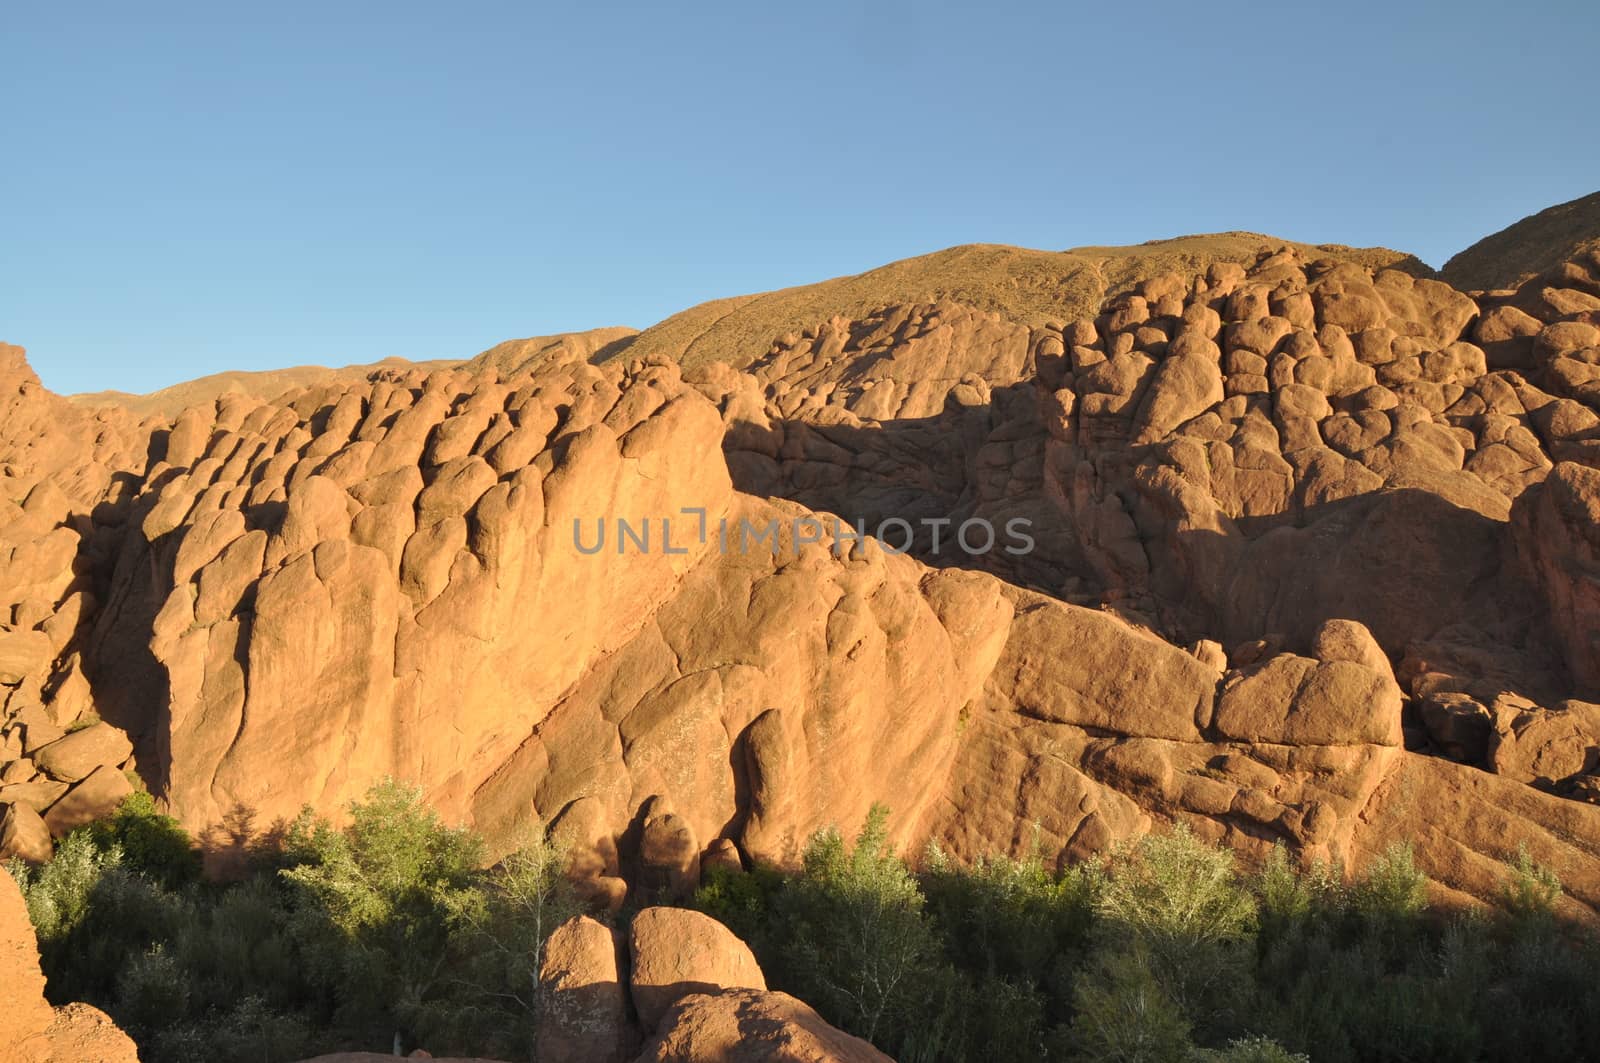 Strange rock formations in Dades Gorge, Morocco, Africa by anderm